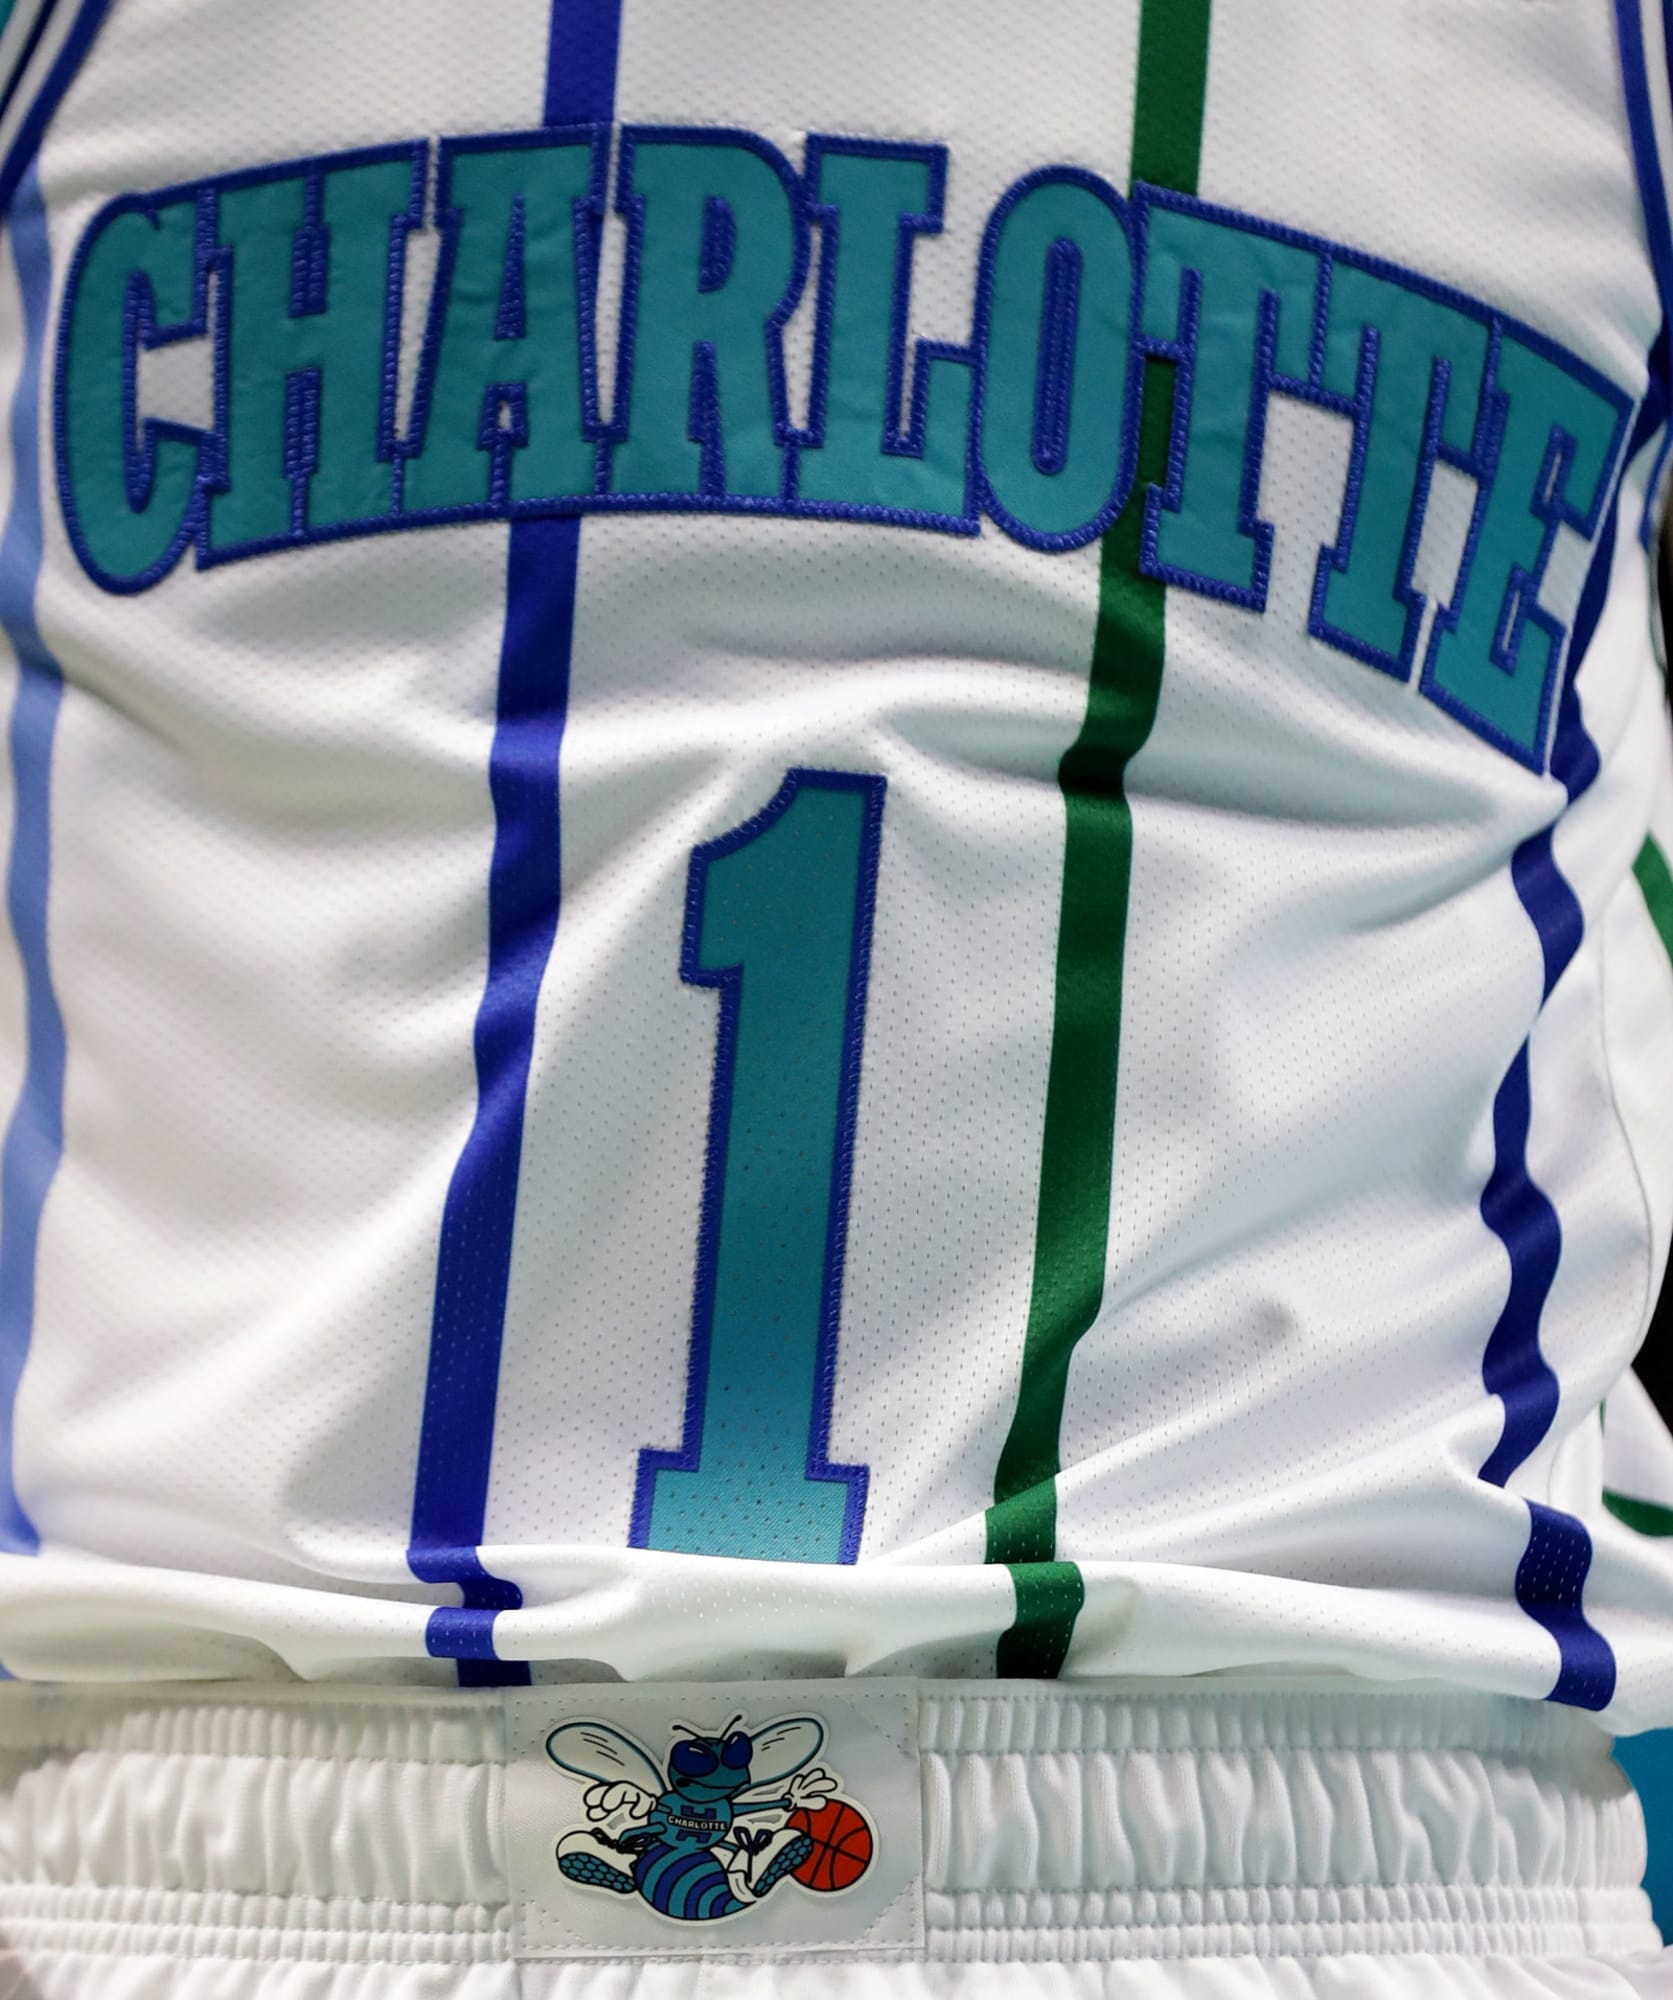 Charlotte Hornets: Ranking the best jerseys in team history